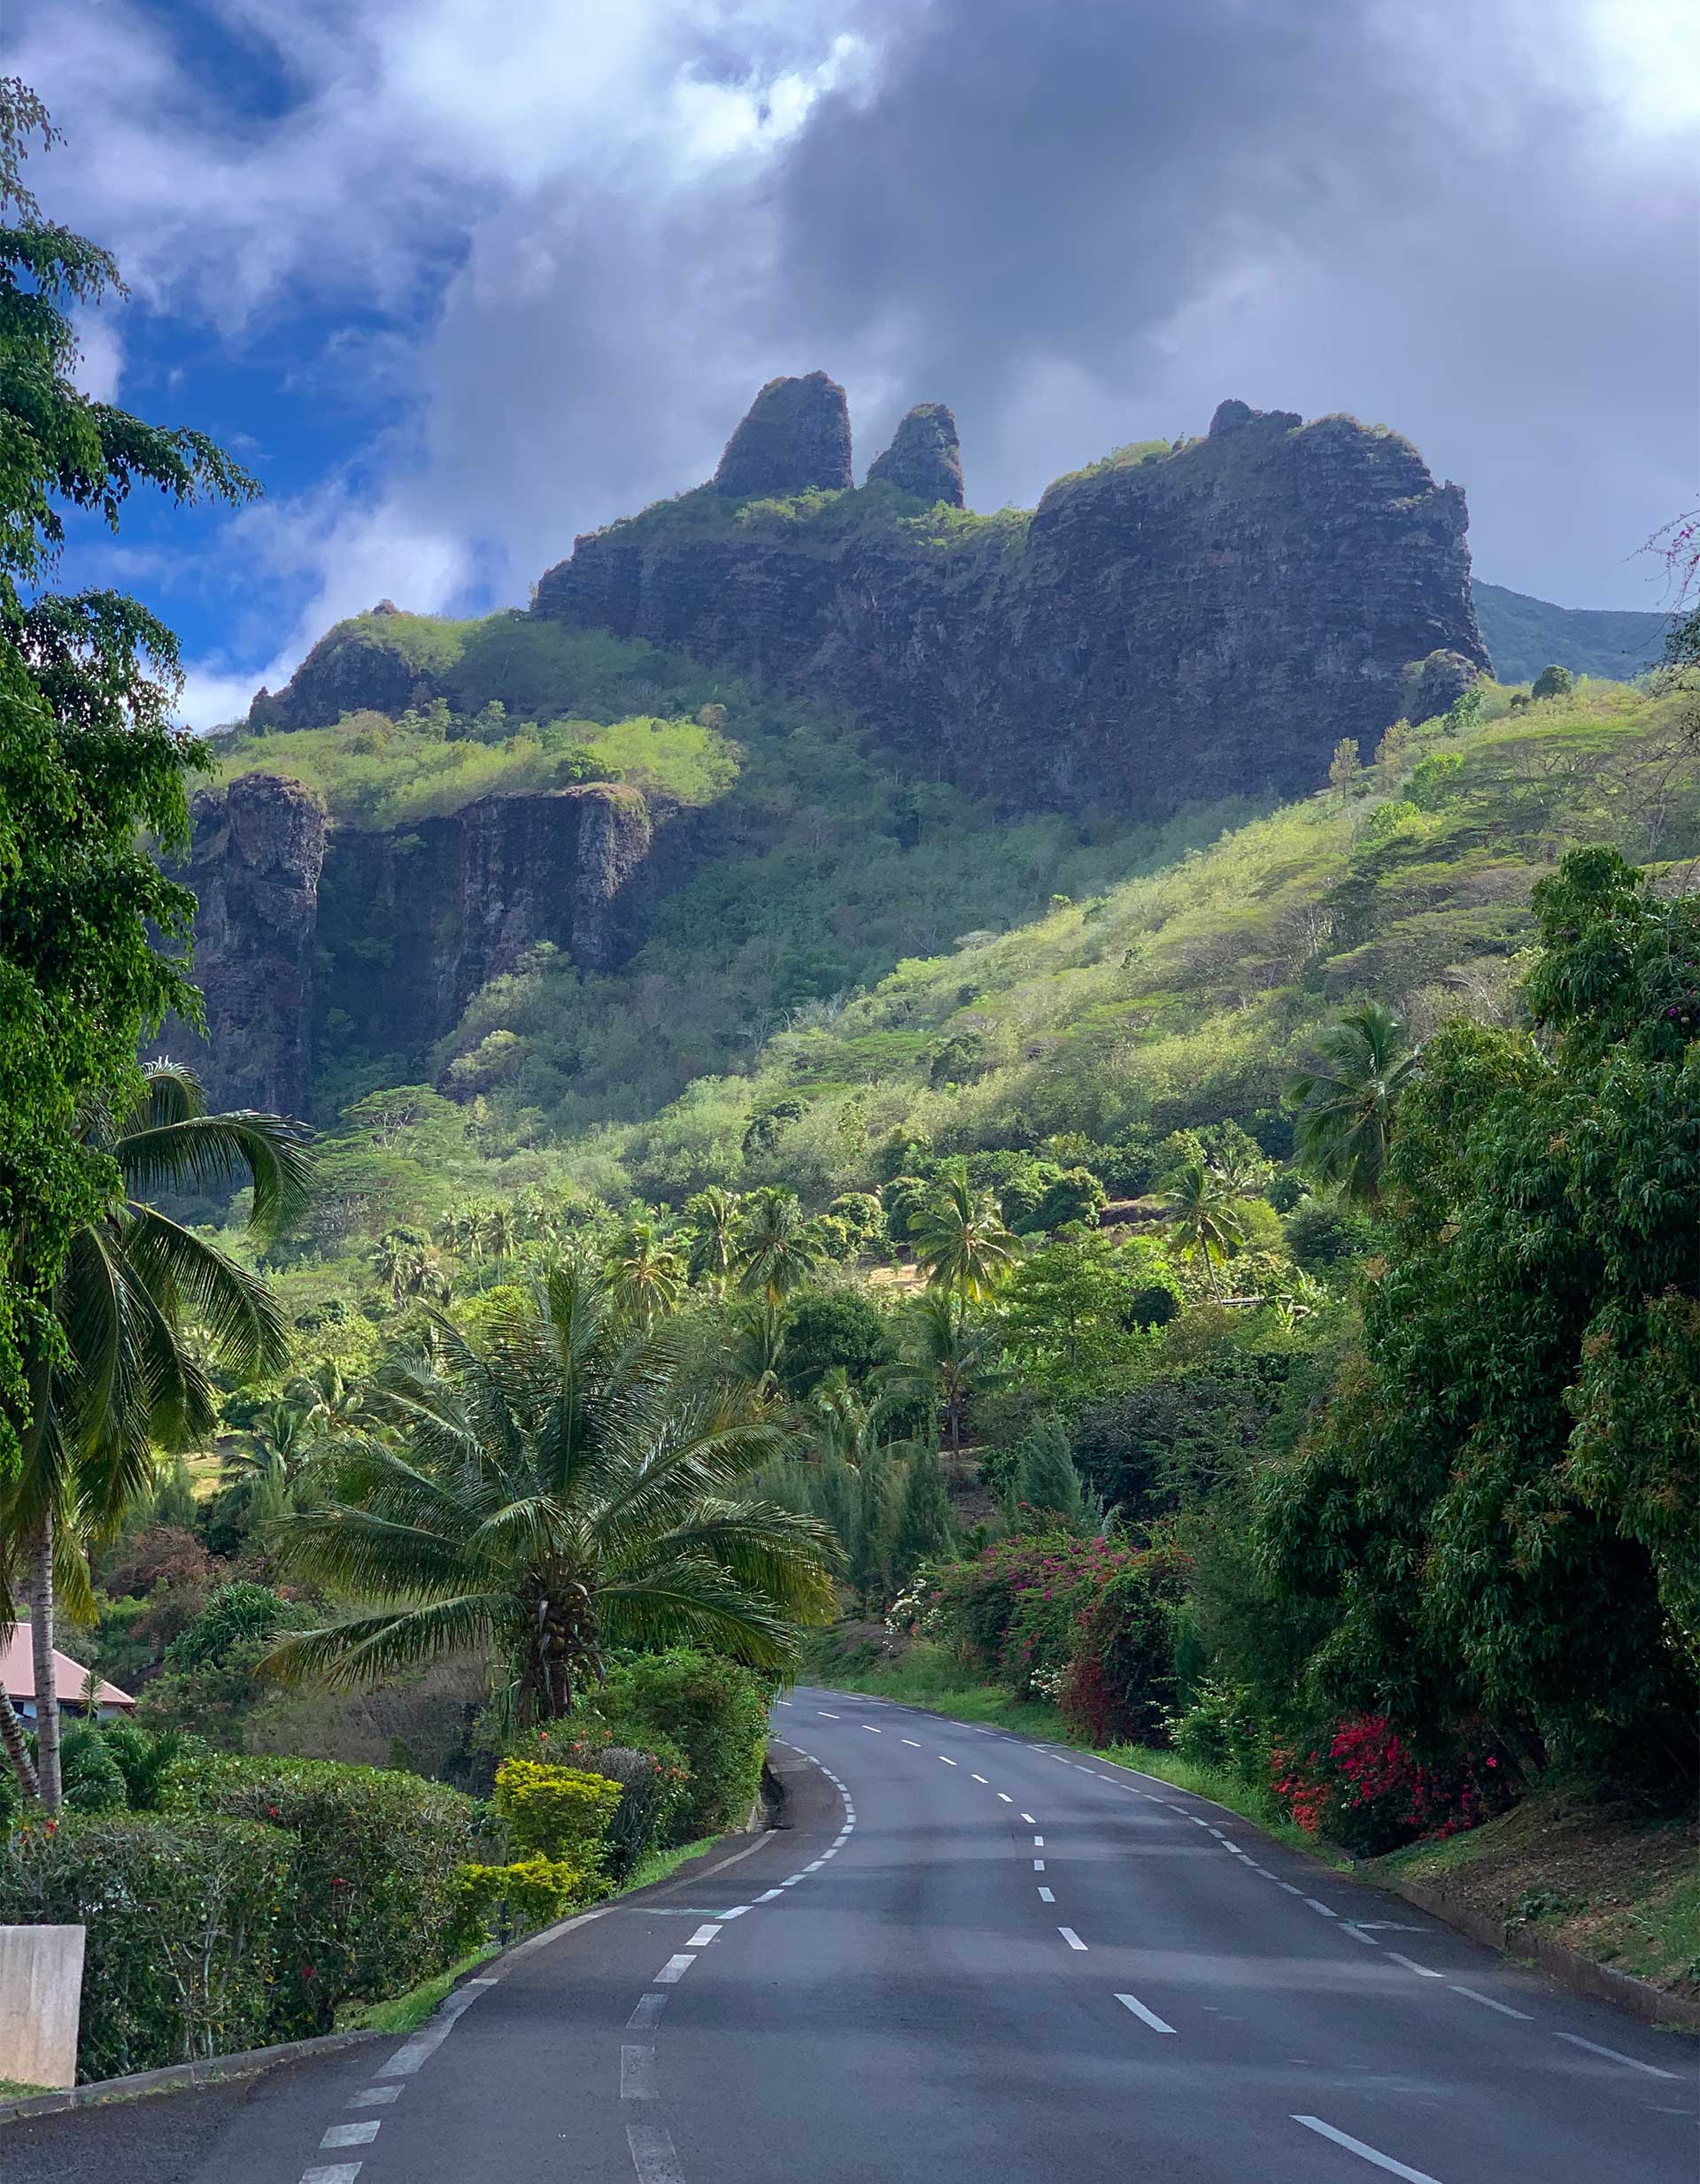 An empty paved road surrounded by a lush tropical mountainous terrain behind a clear sky.